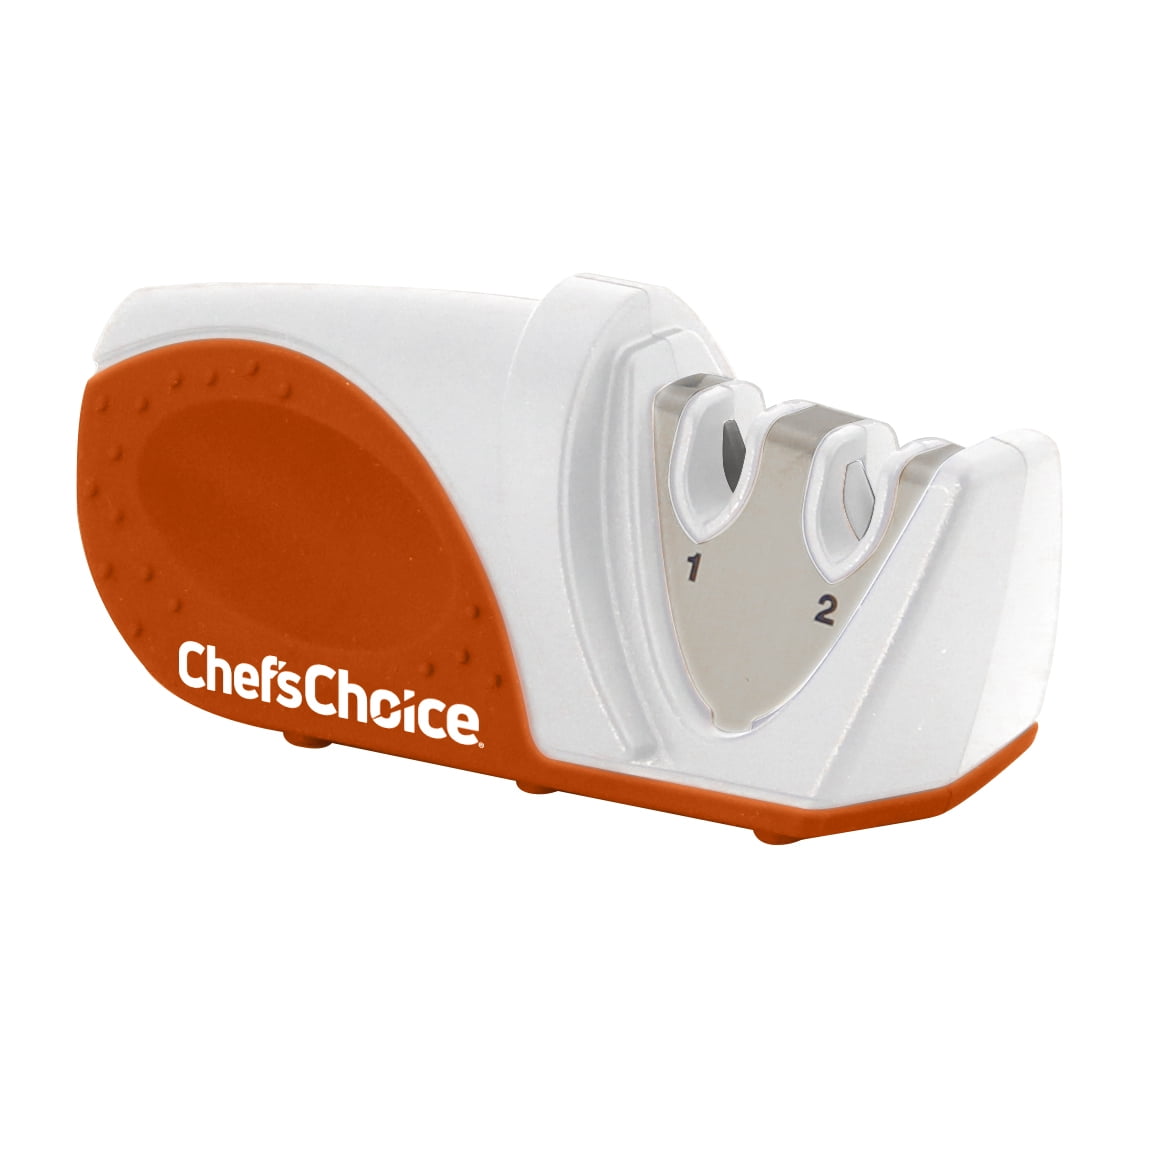 Chef's Choice Compact 2-Stage Manual Knife Sharpener, White/Orange, 4760